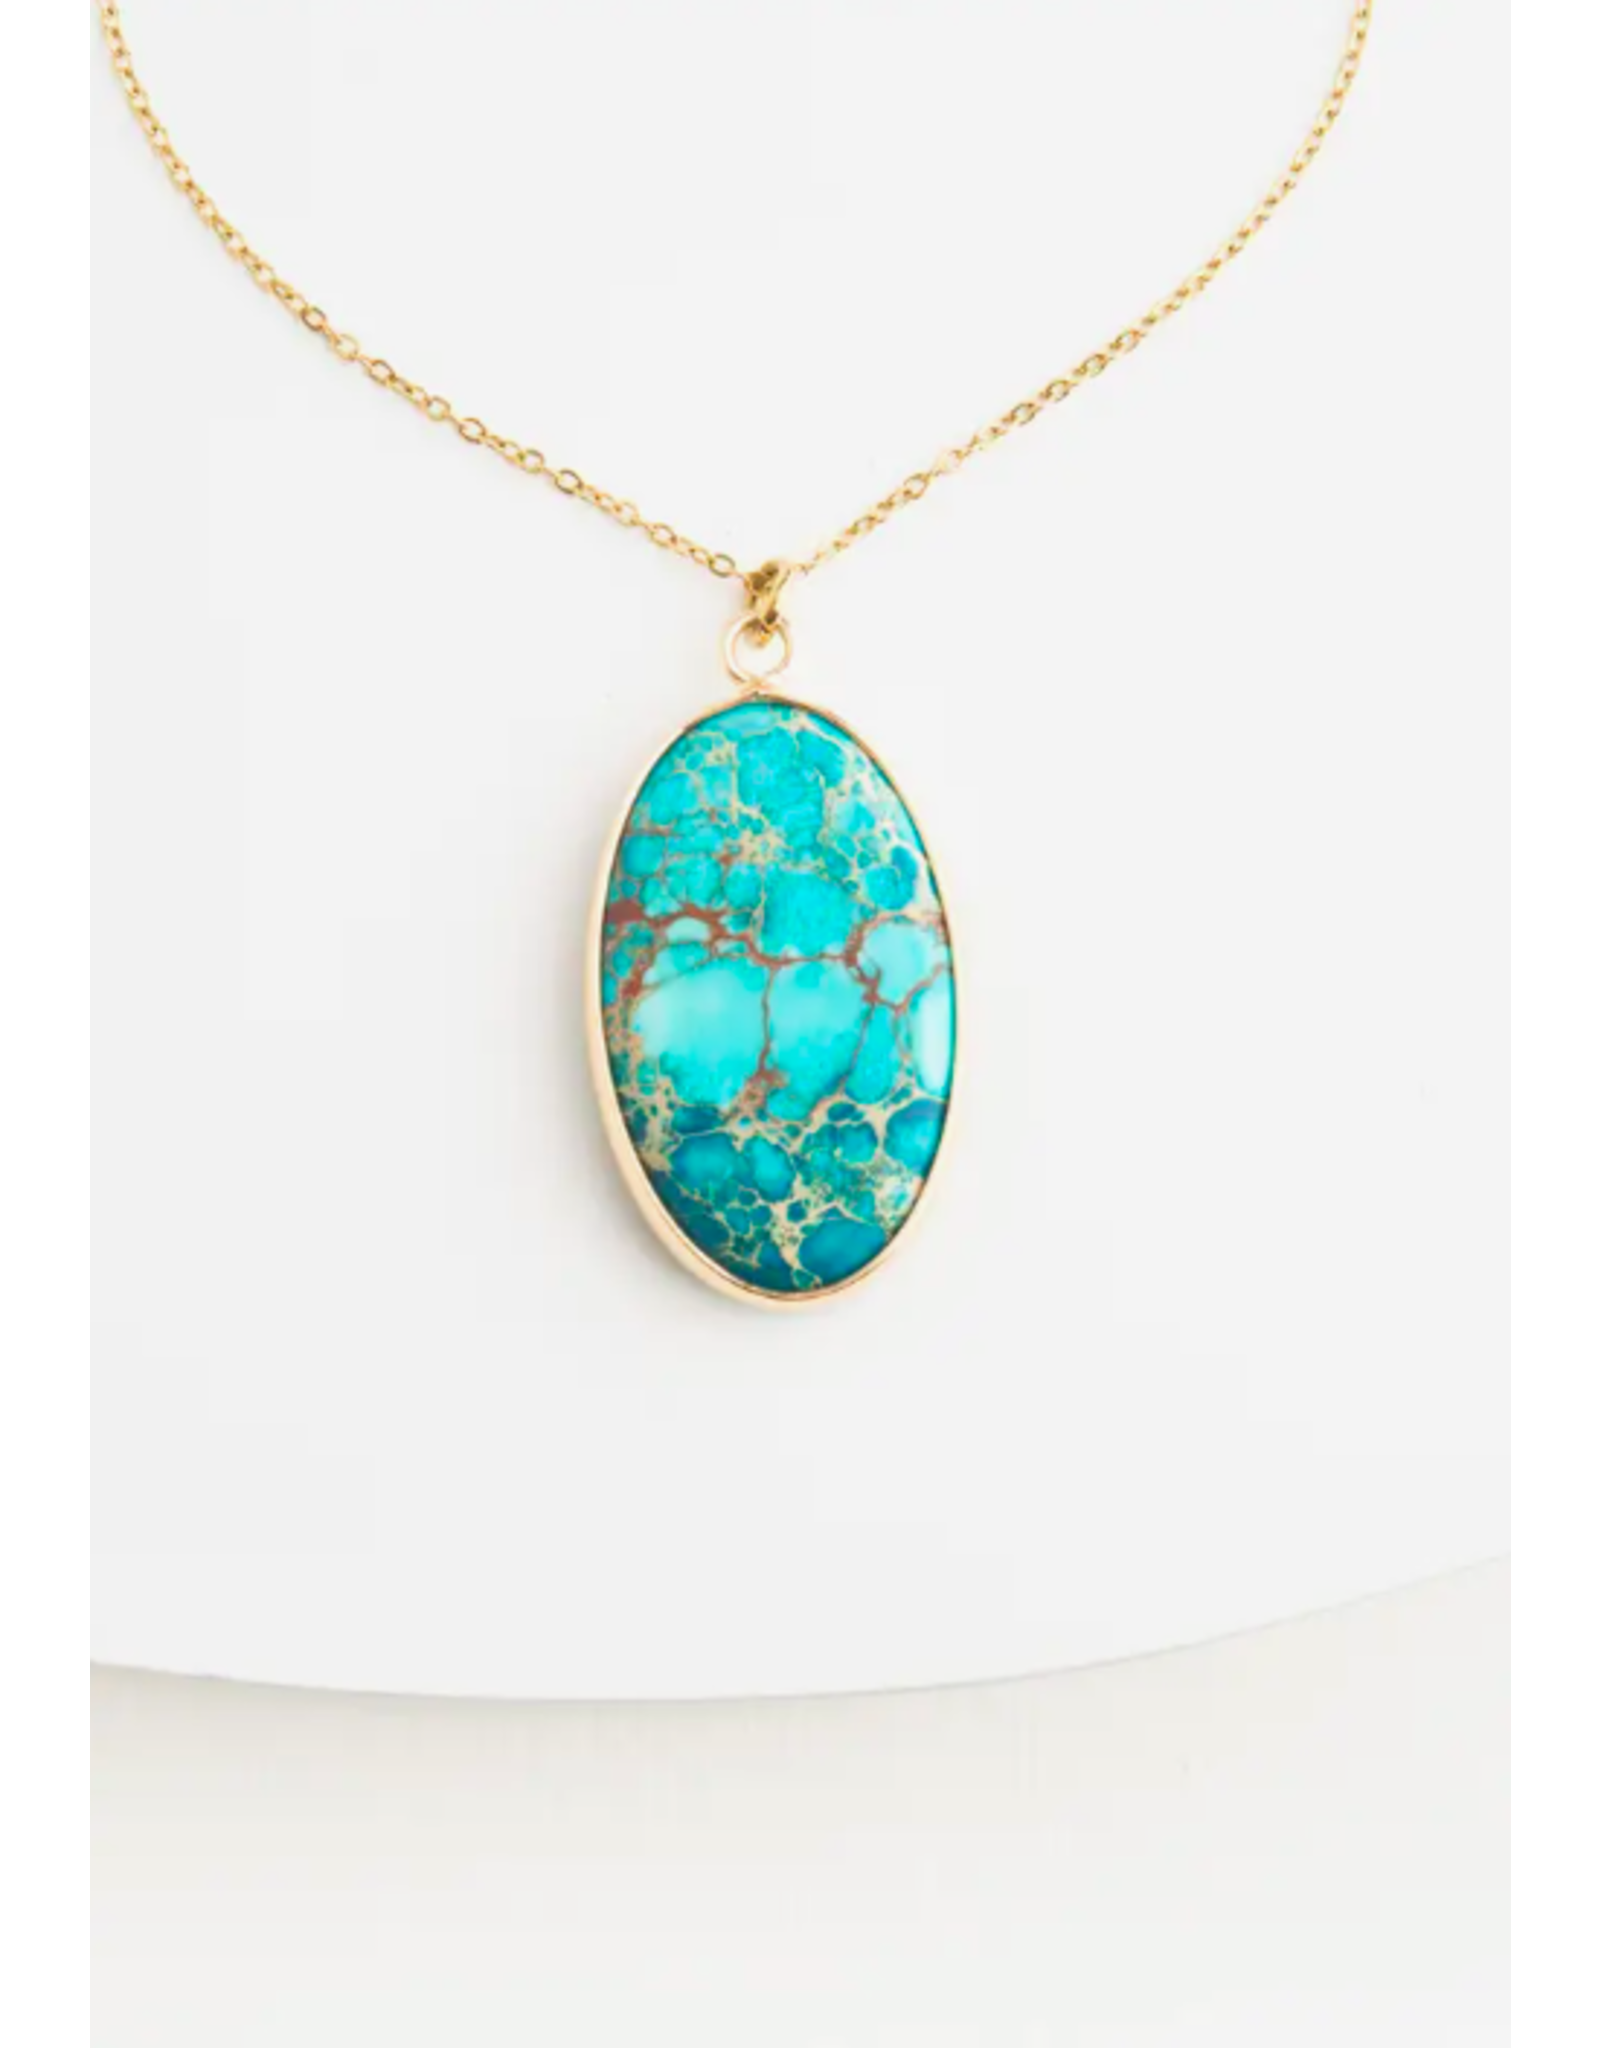 Trade roots Tranquil Turquoise Necklace, Asia